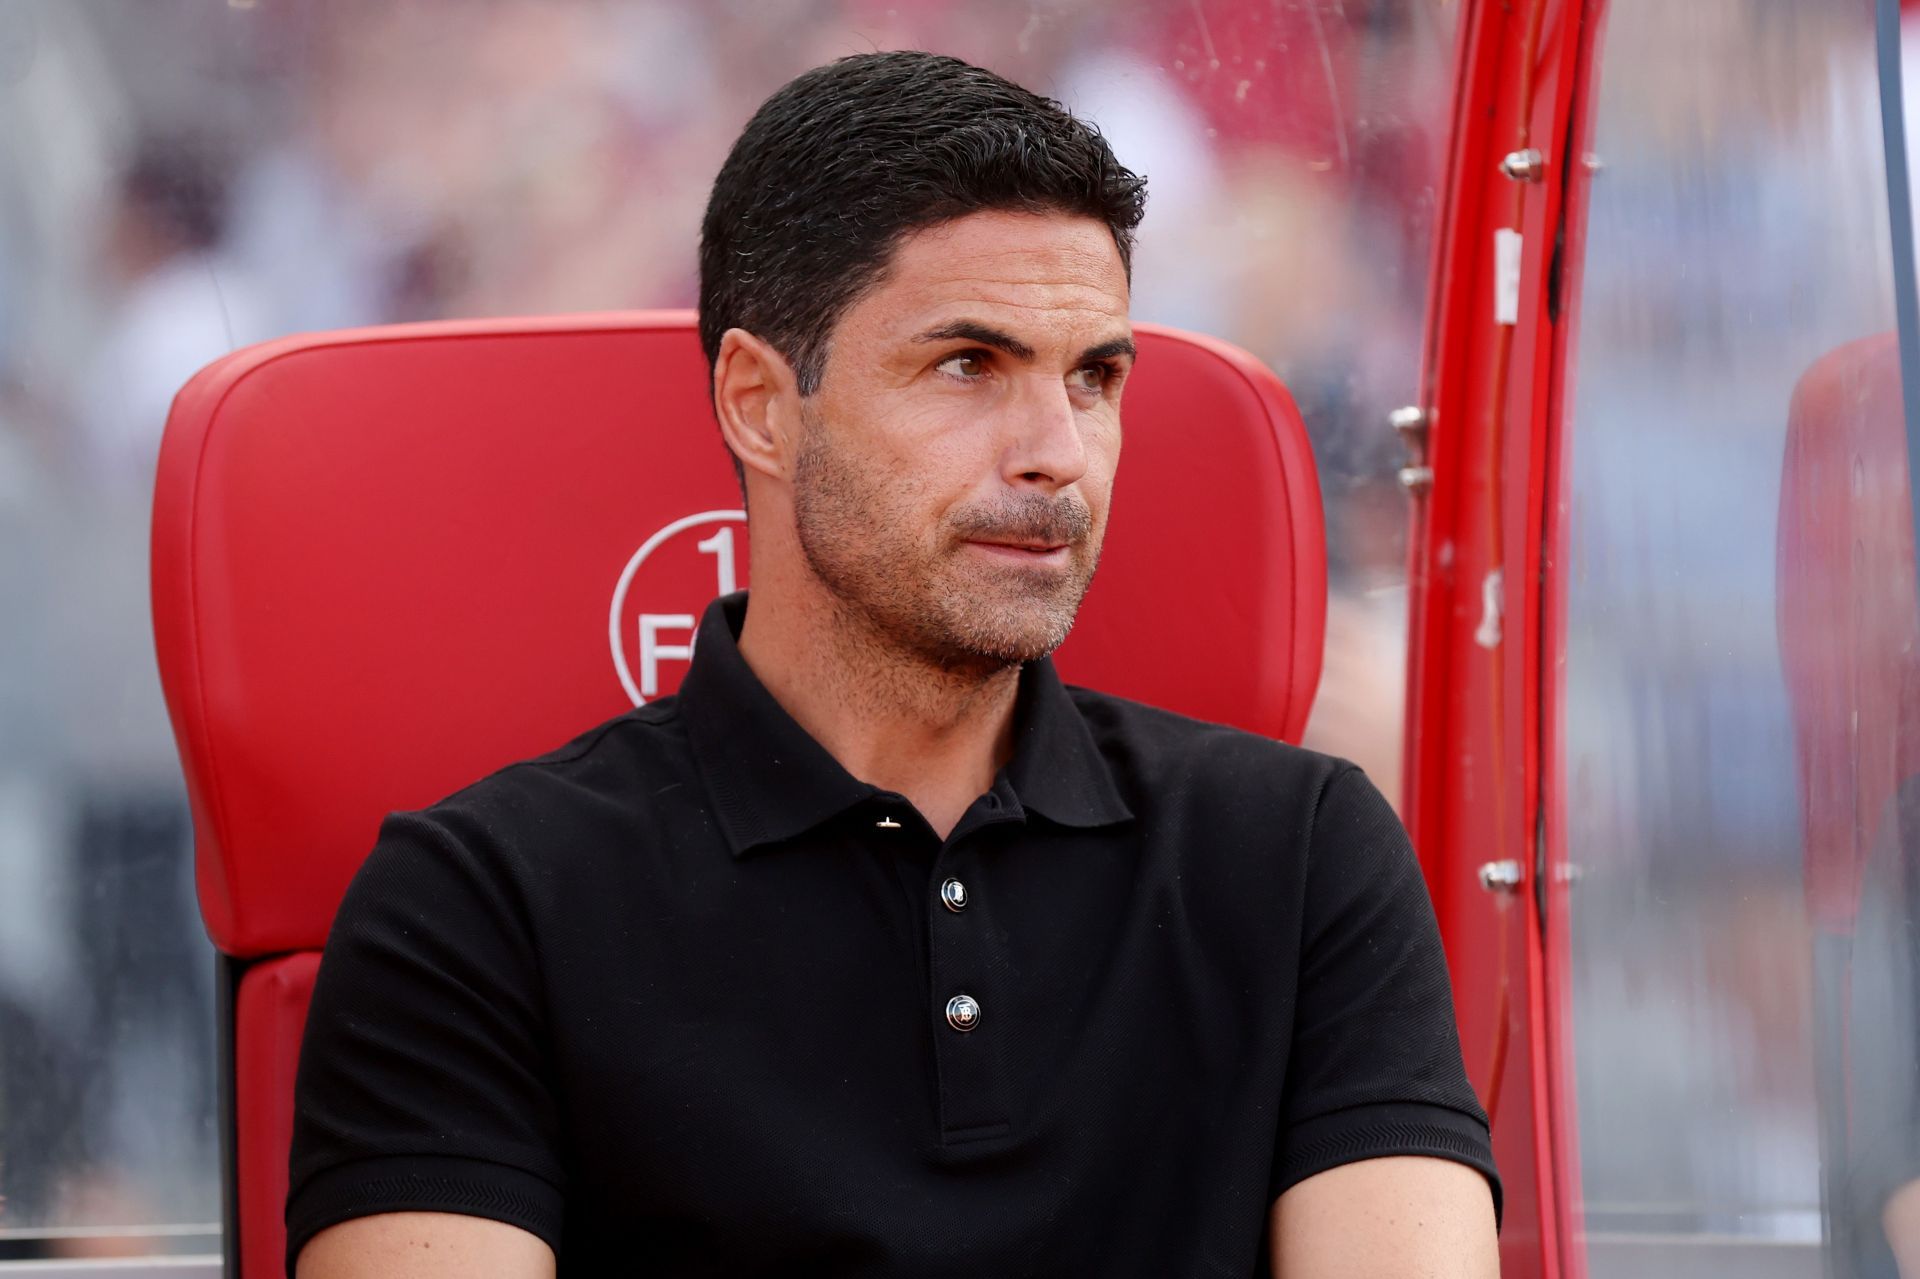 Mikel Arteta questioned his Arsenal future after a disappointing 2022-23 season.